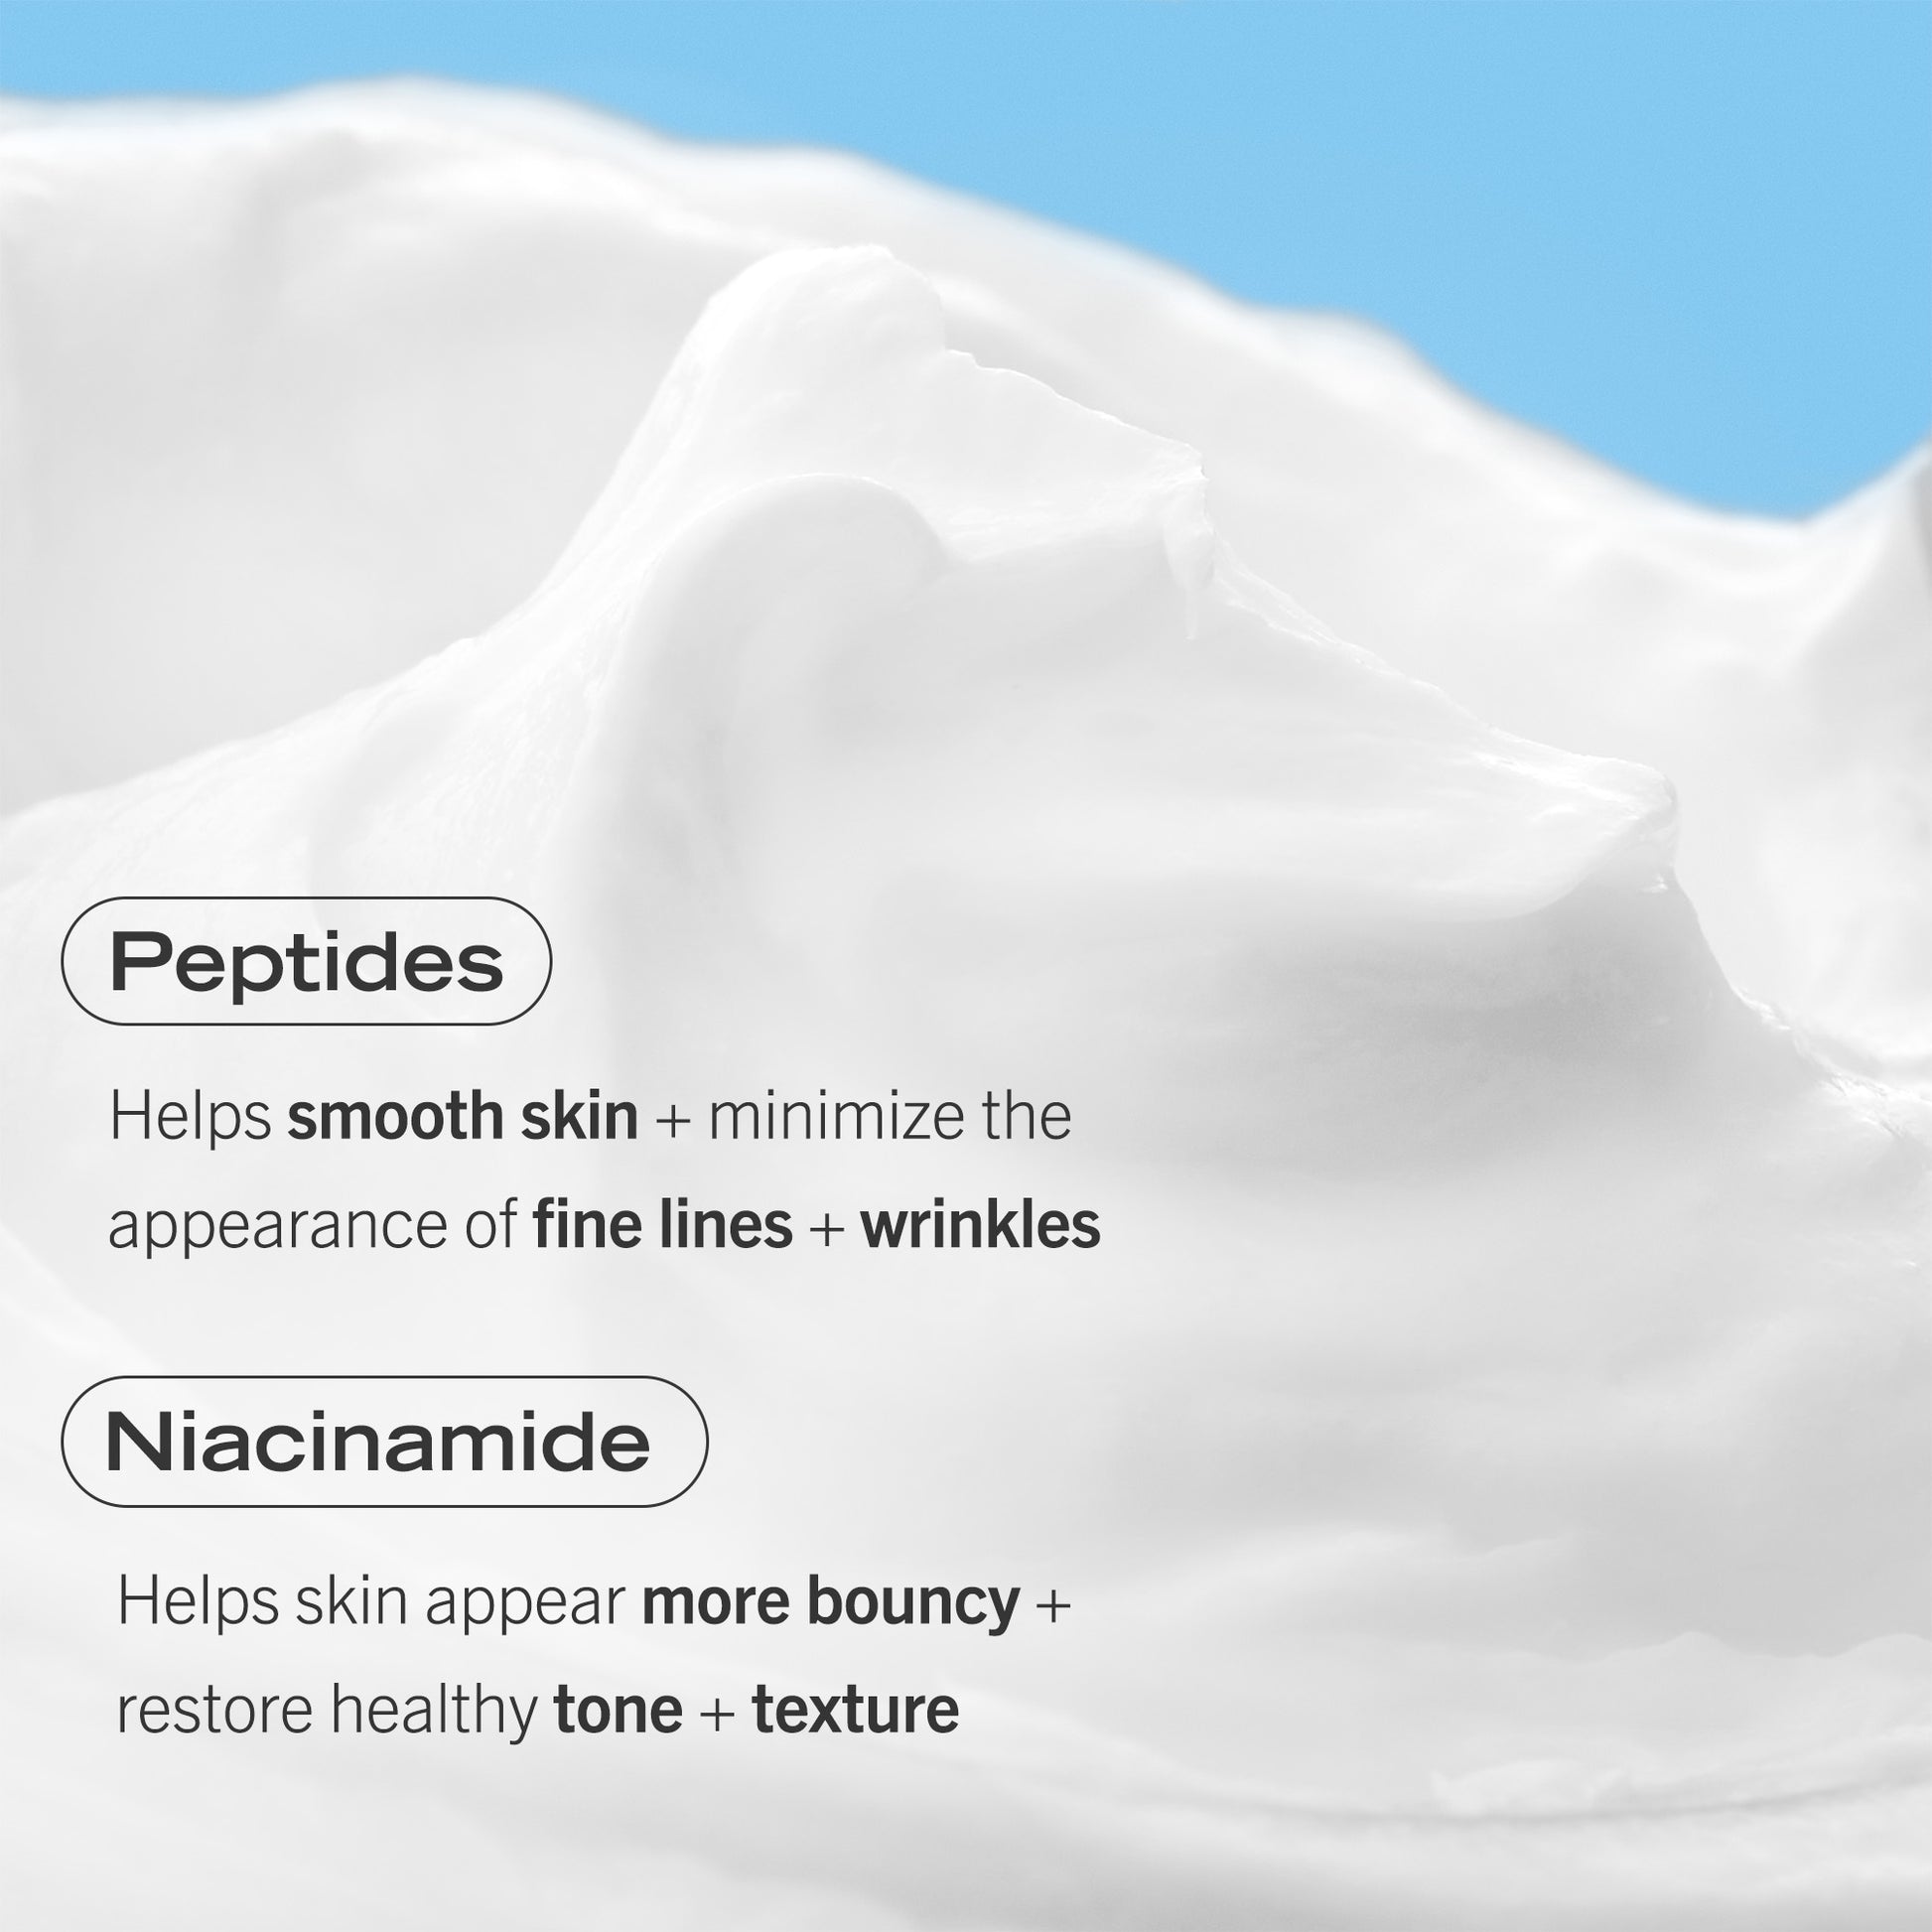 Consistency of Firming Cream.  Peptides: Helps smooth skin +minimize the appearance of fine lines + wrinkles.  Niacinamide: Helps skin appear more bouncy + restore healthy tone + texture.